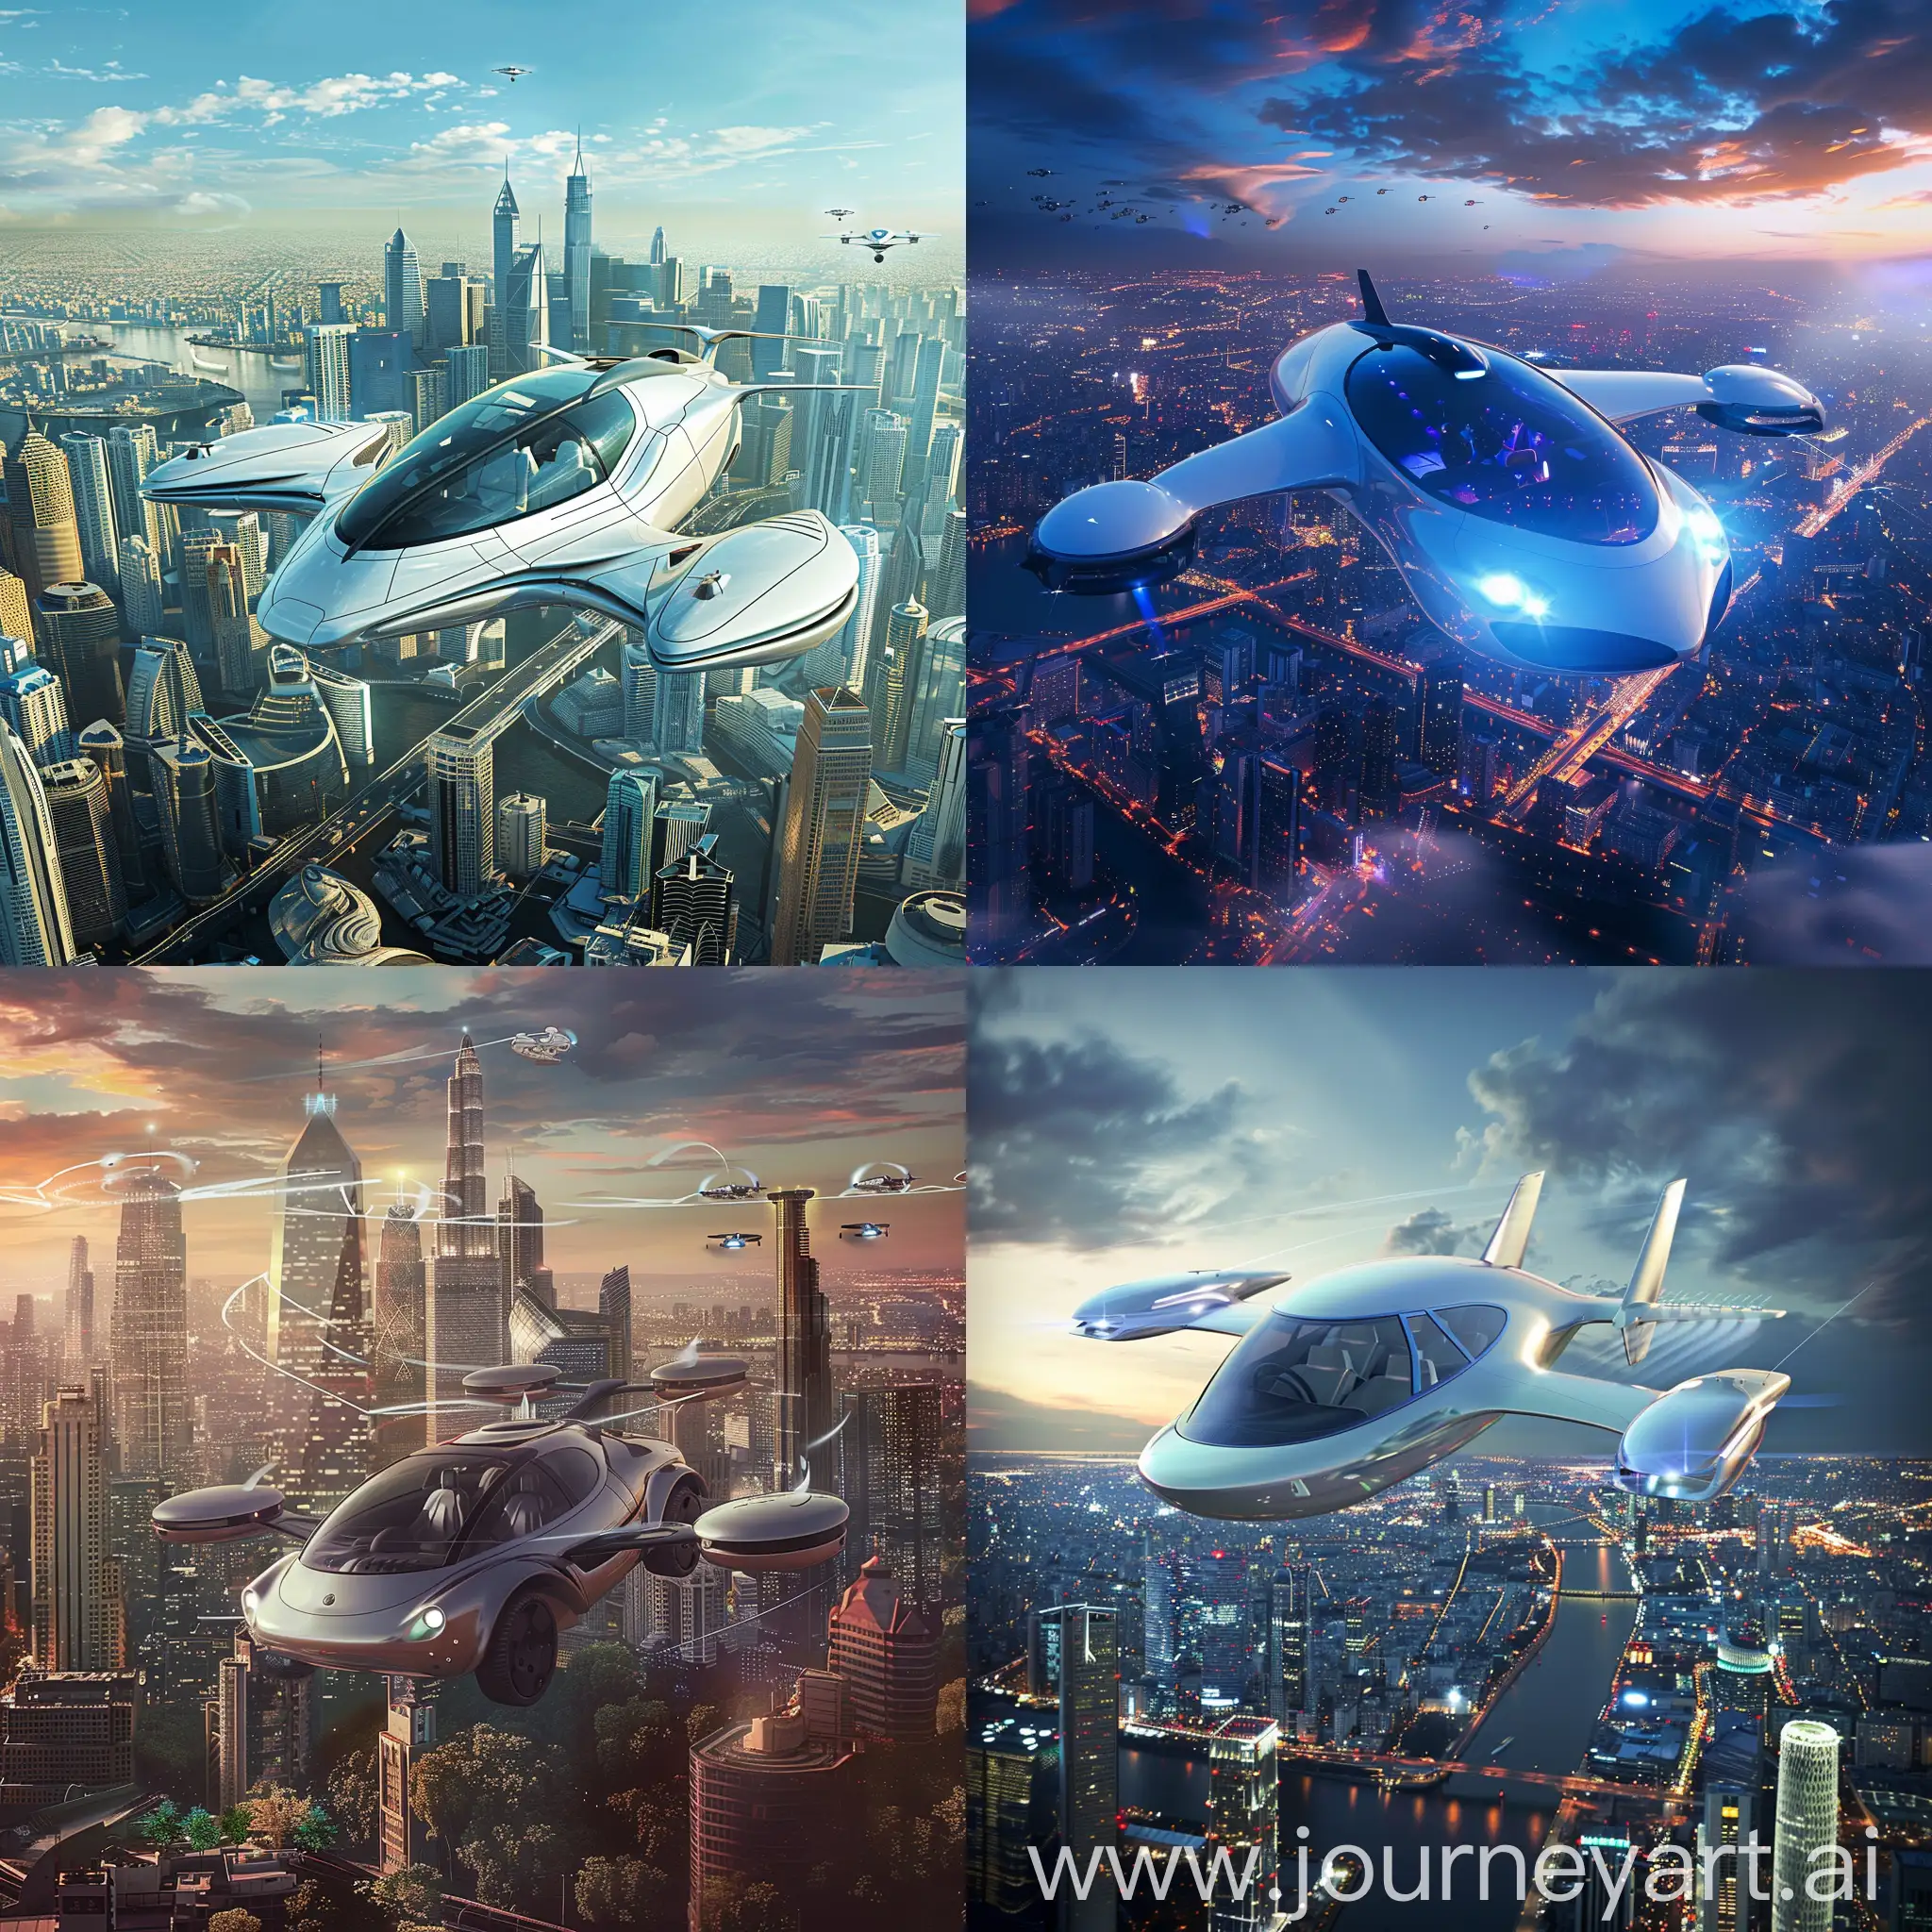 Futuristic-Skyline-with-Flying-Cars-Envisioning-the-Future-of-Transportation